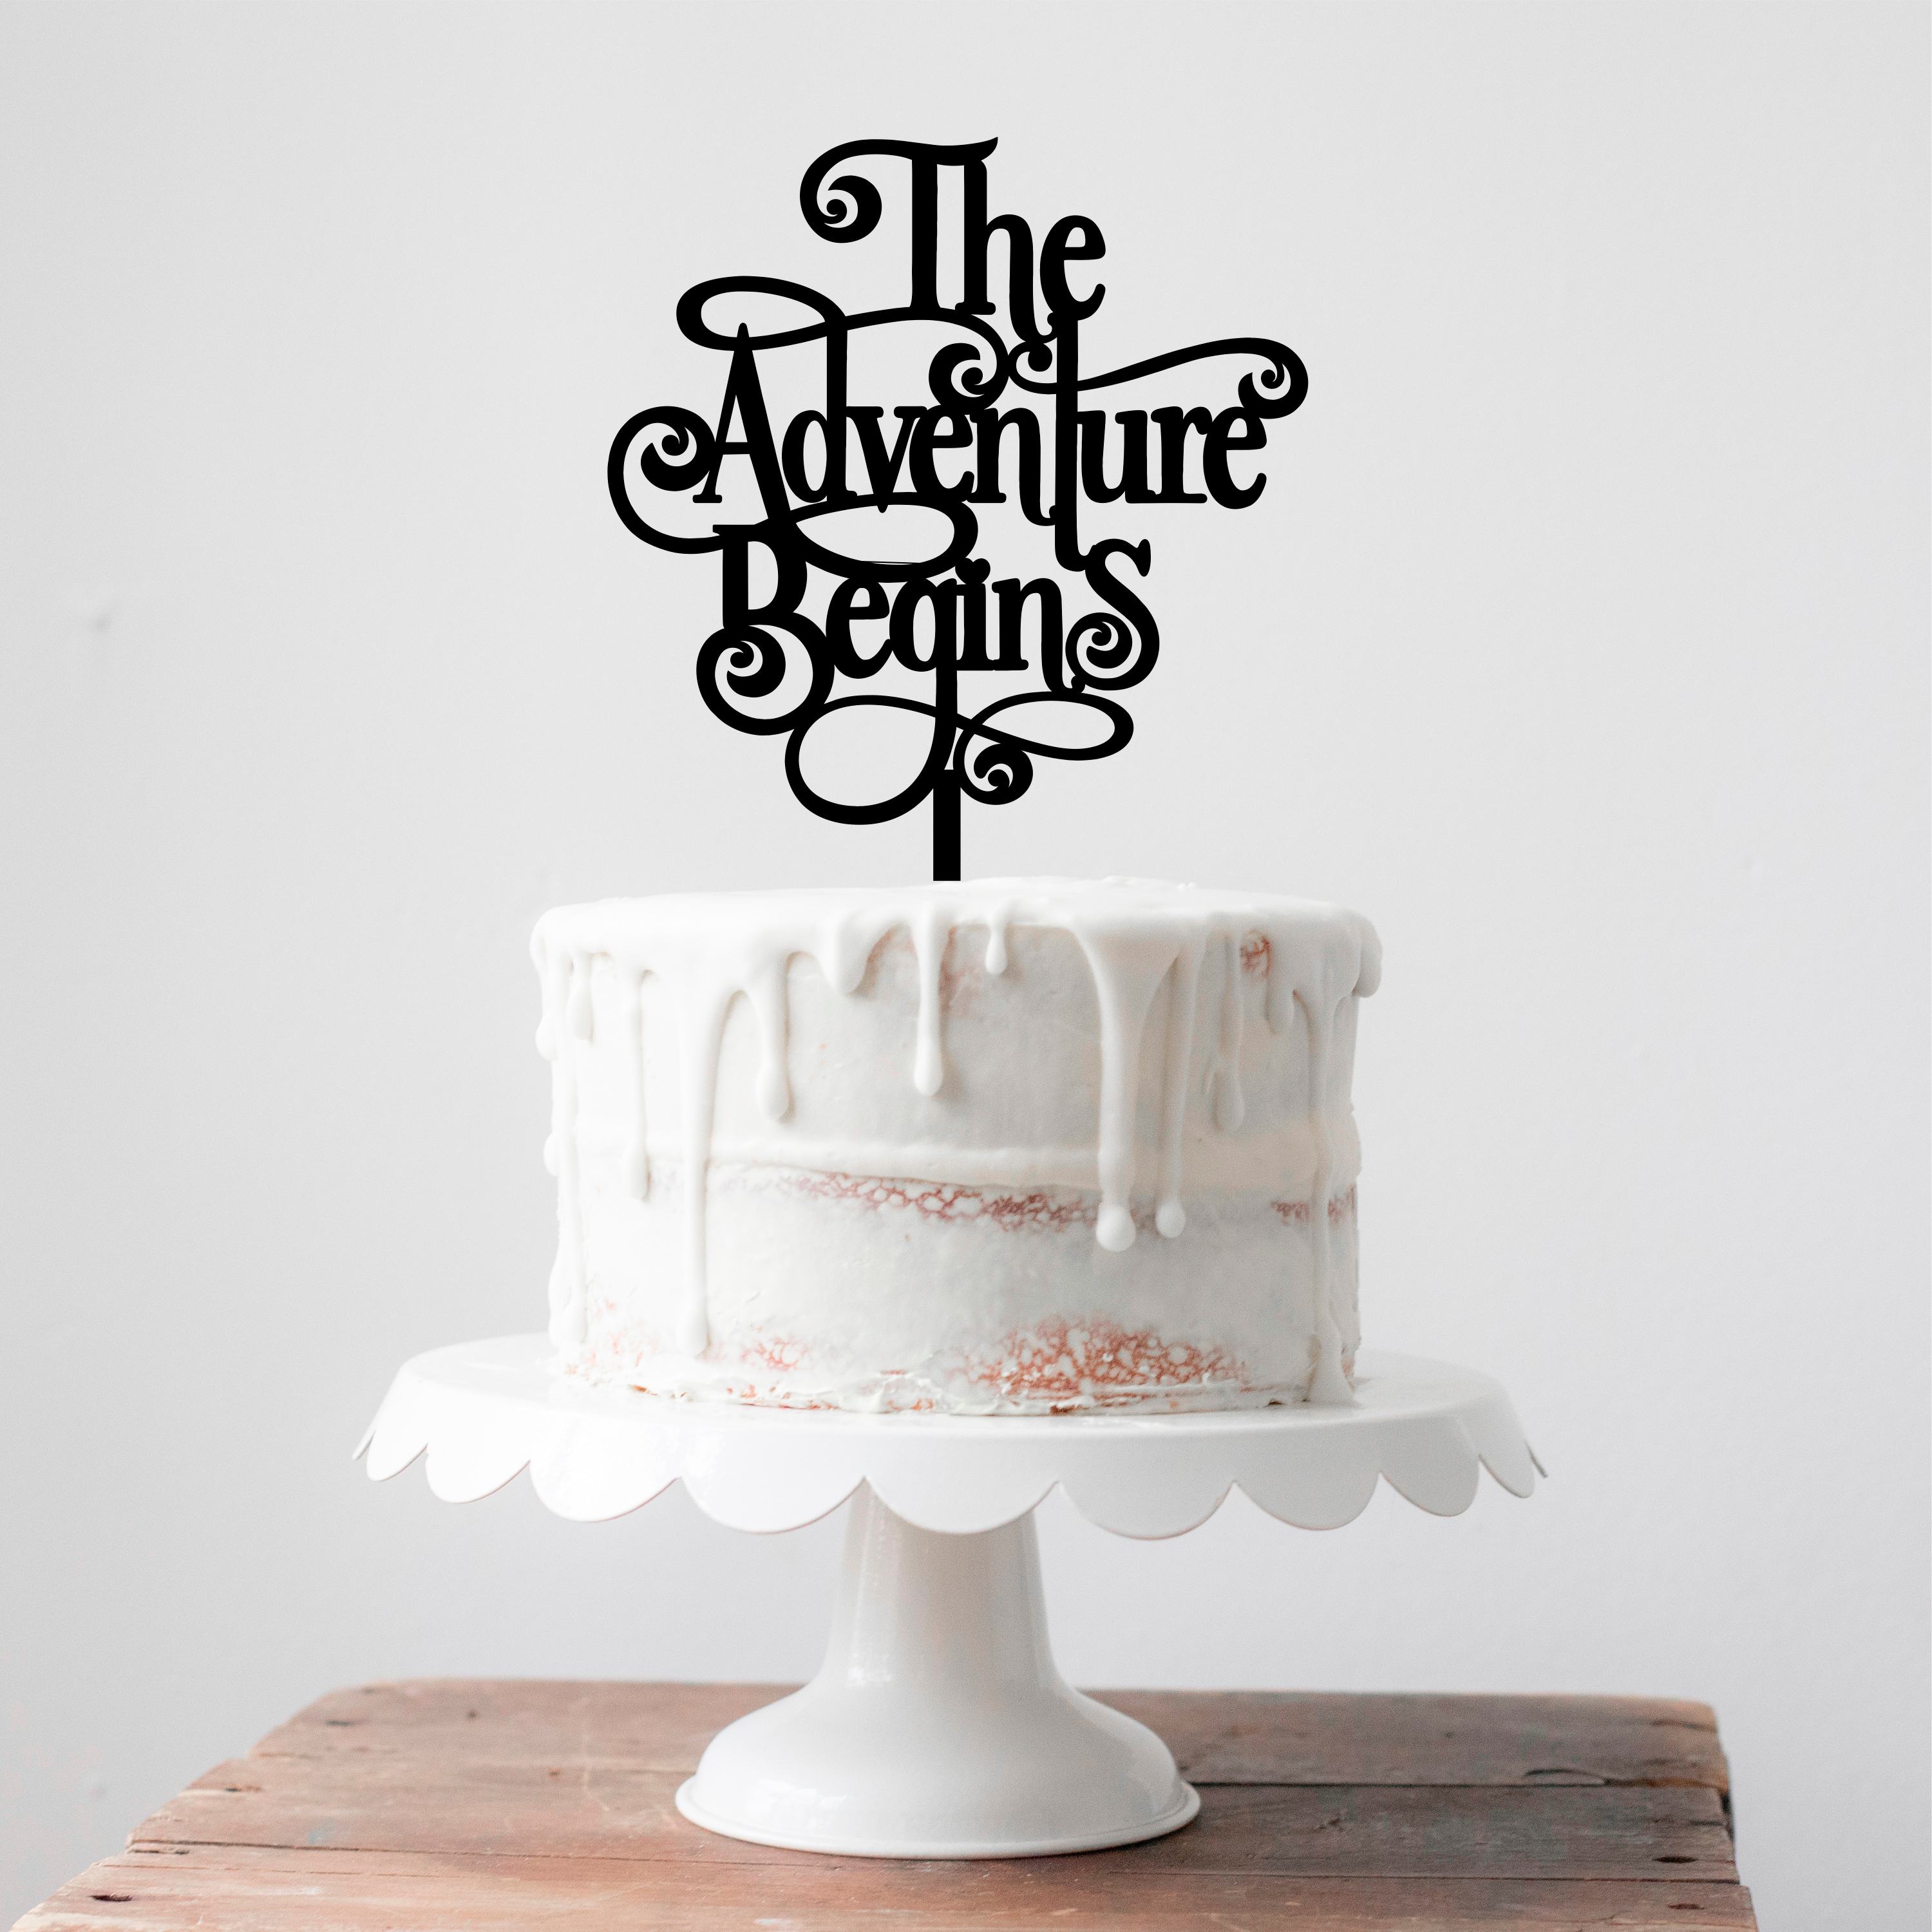 The Adventure Begins Cake Topper - Wood (MDF) or Acrylic - Wood Cake Topper - Acrylic Cake Topper - Wedding - Cake - Topper -